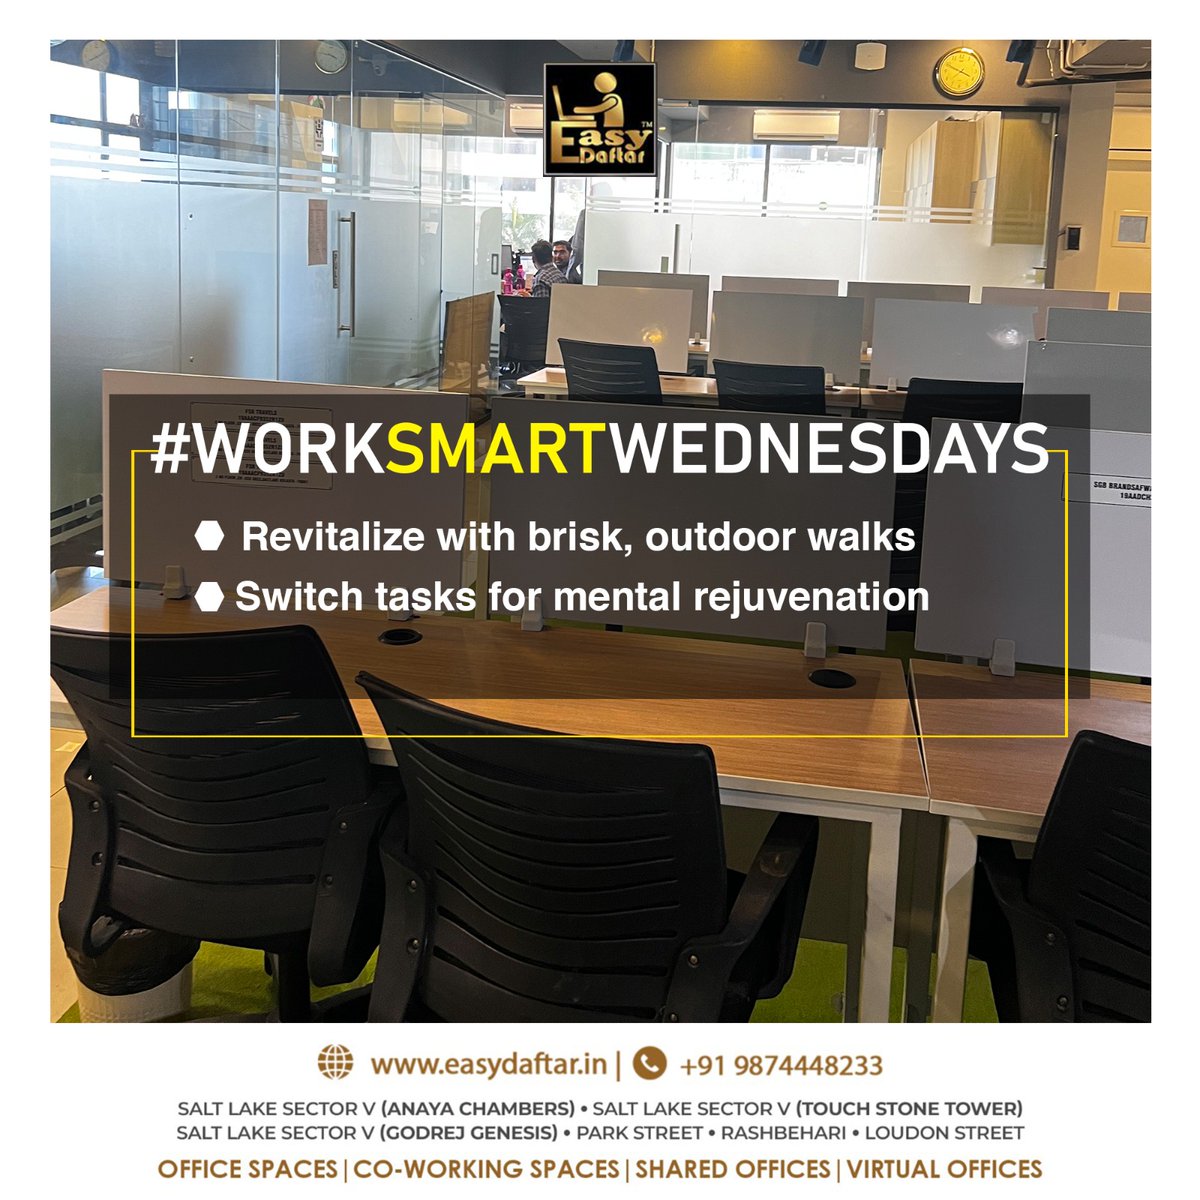 Indulge in the rejuvenating power of nature and invigorate your mind with varied tasks. Elevate your Wednesday with refreshing routines for a renewed sense of vitality. 

#EasyDaftar #EDWorkspace #EasyDaftarOffice #DaftarYourDay #OfficeEssentials #WorkplaceStyle #EfficiencyBoost